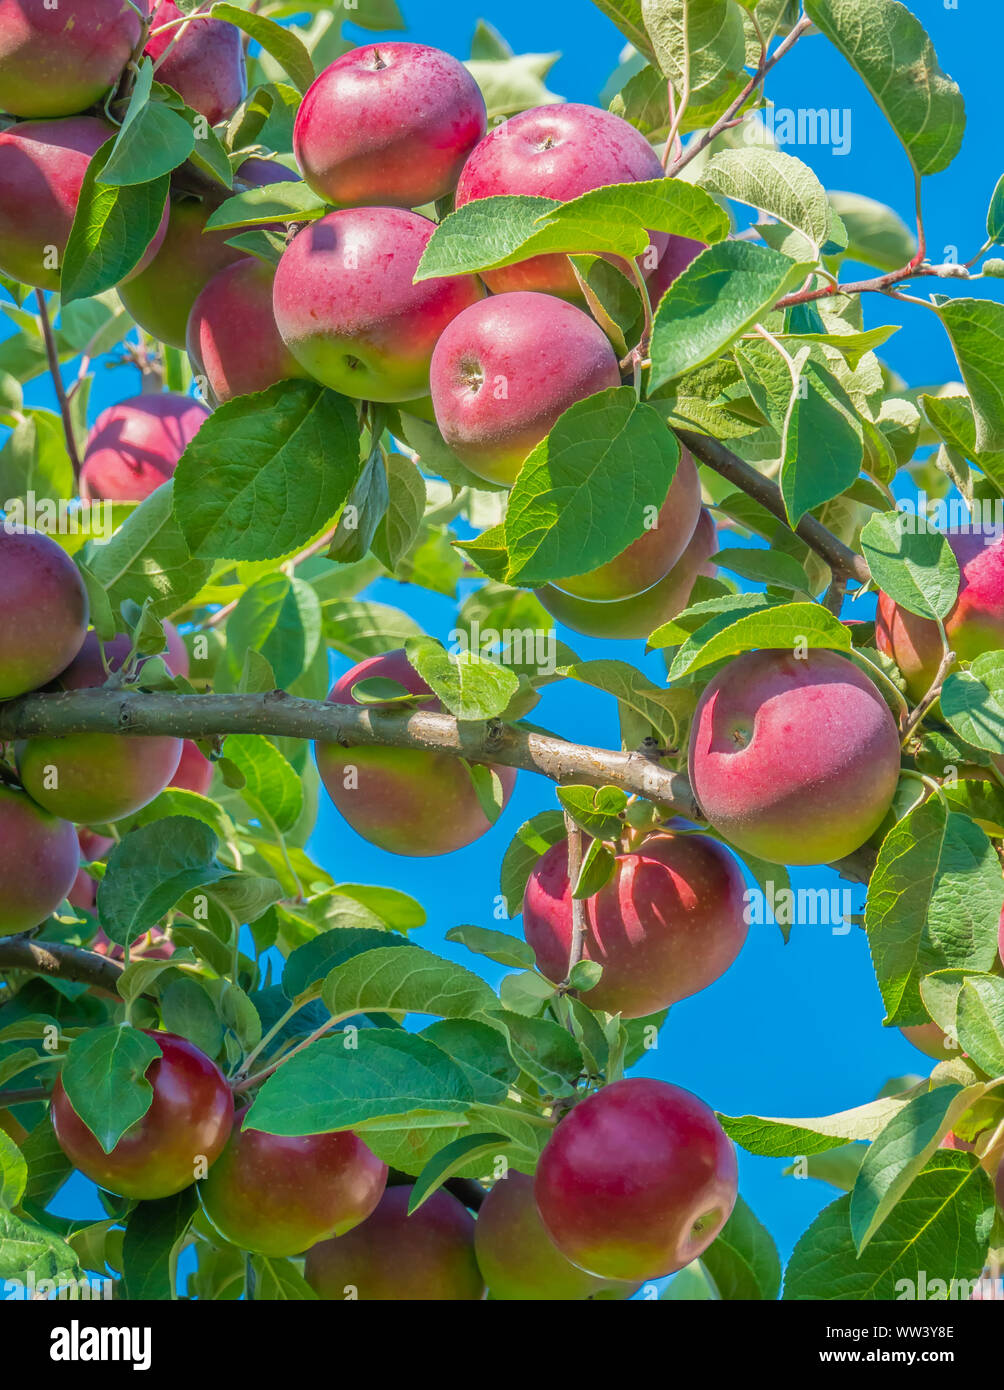 https://c8.alamy.com/comp/WW3Y8E/ripe-mcintosh-apples-on-the-tree-this-variety-is-the-national-apple-of-canada-WW3Y8E.jpg